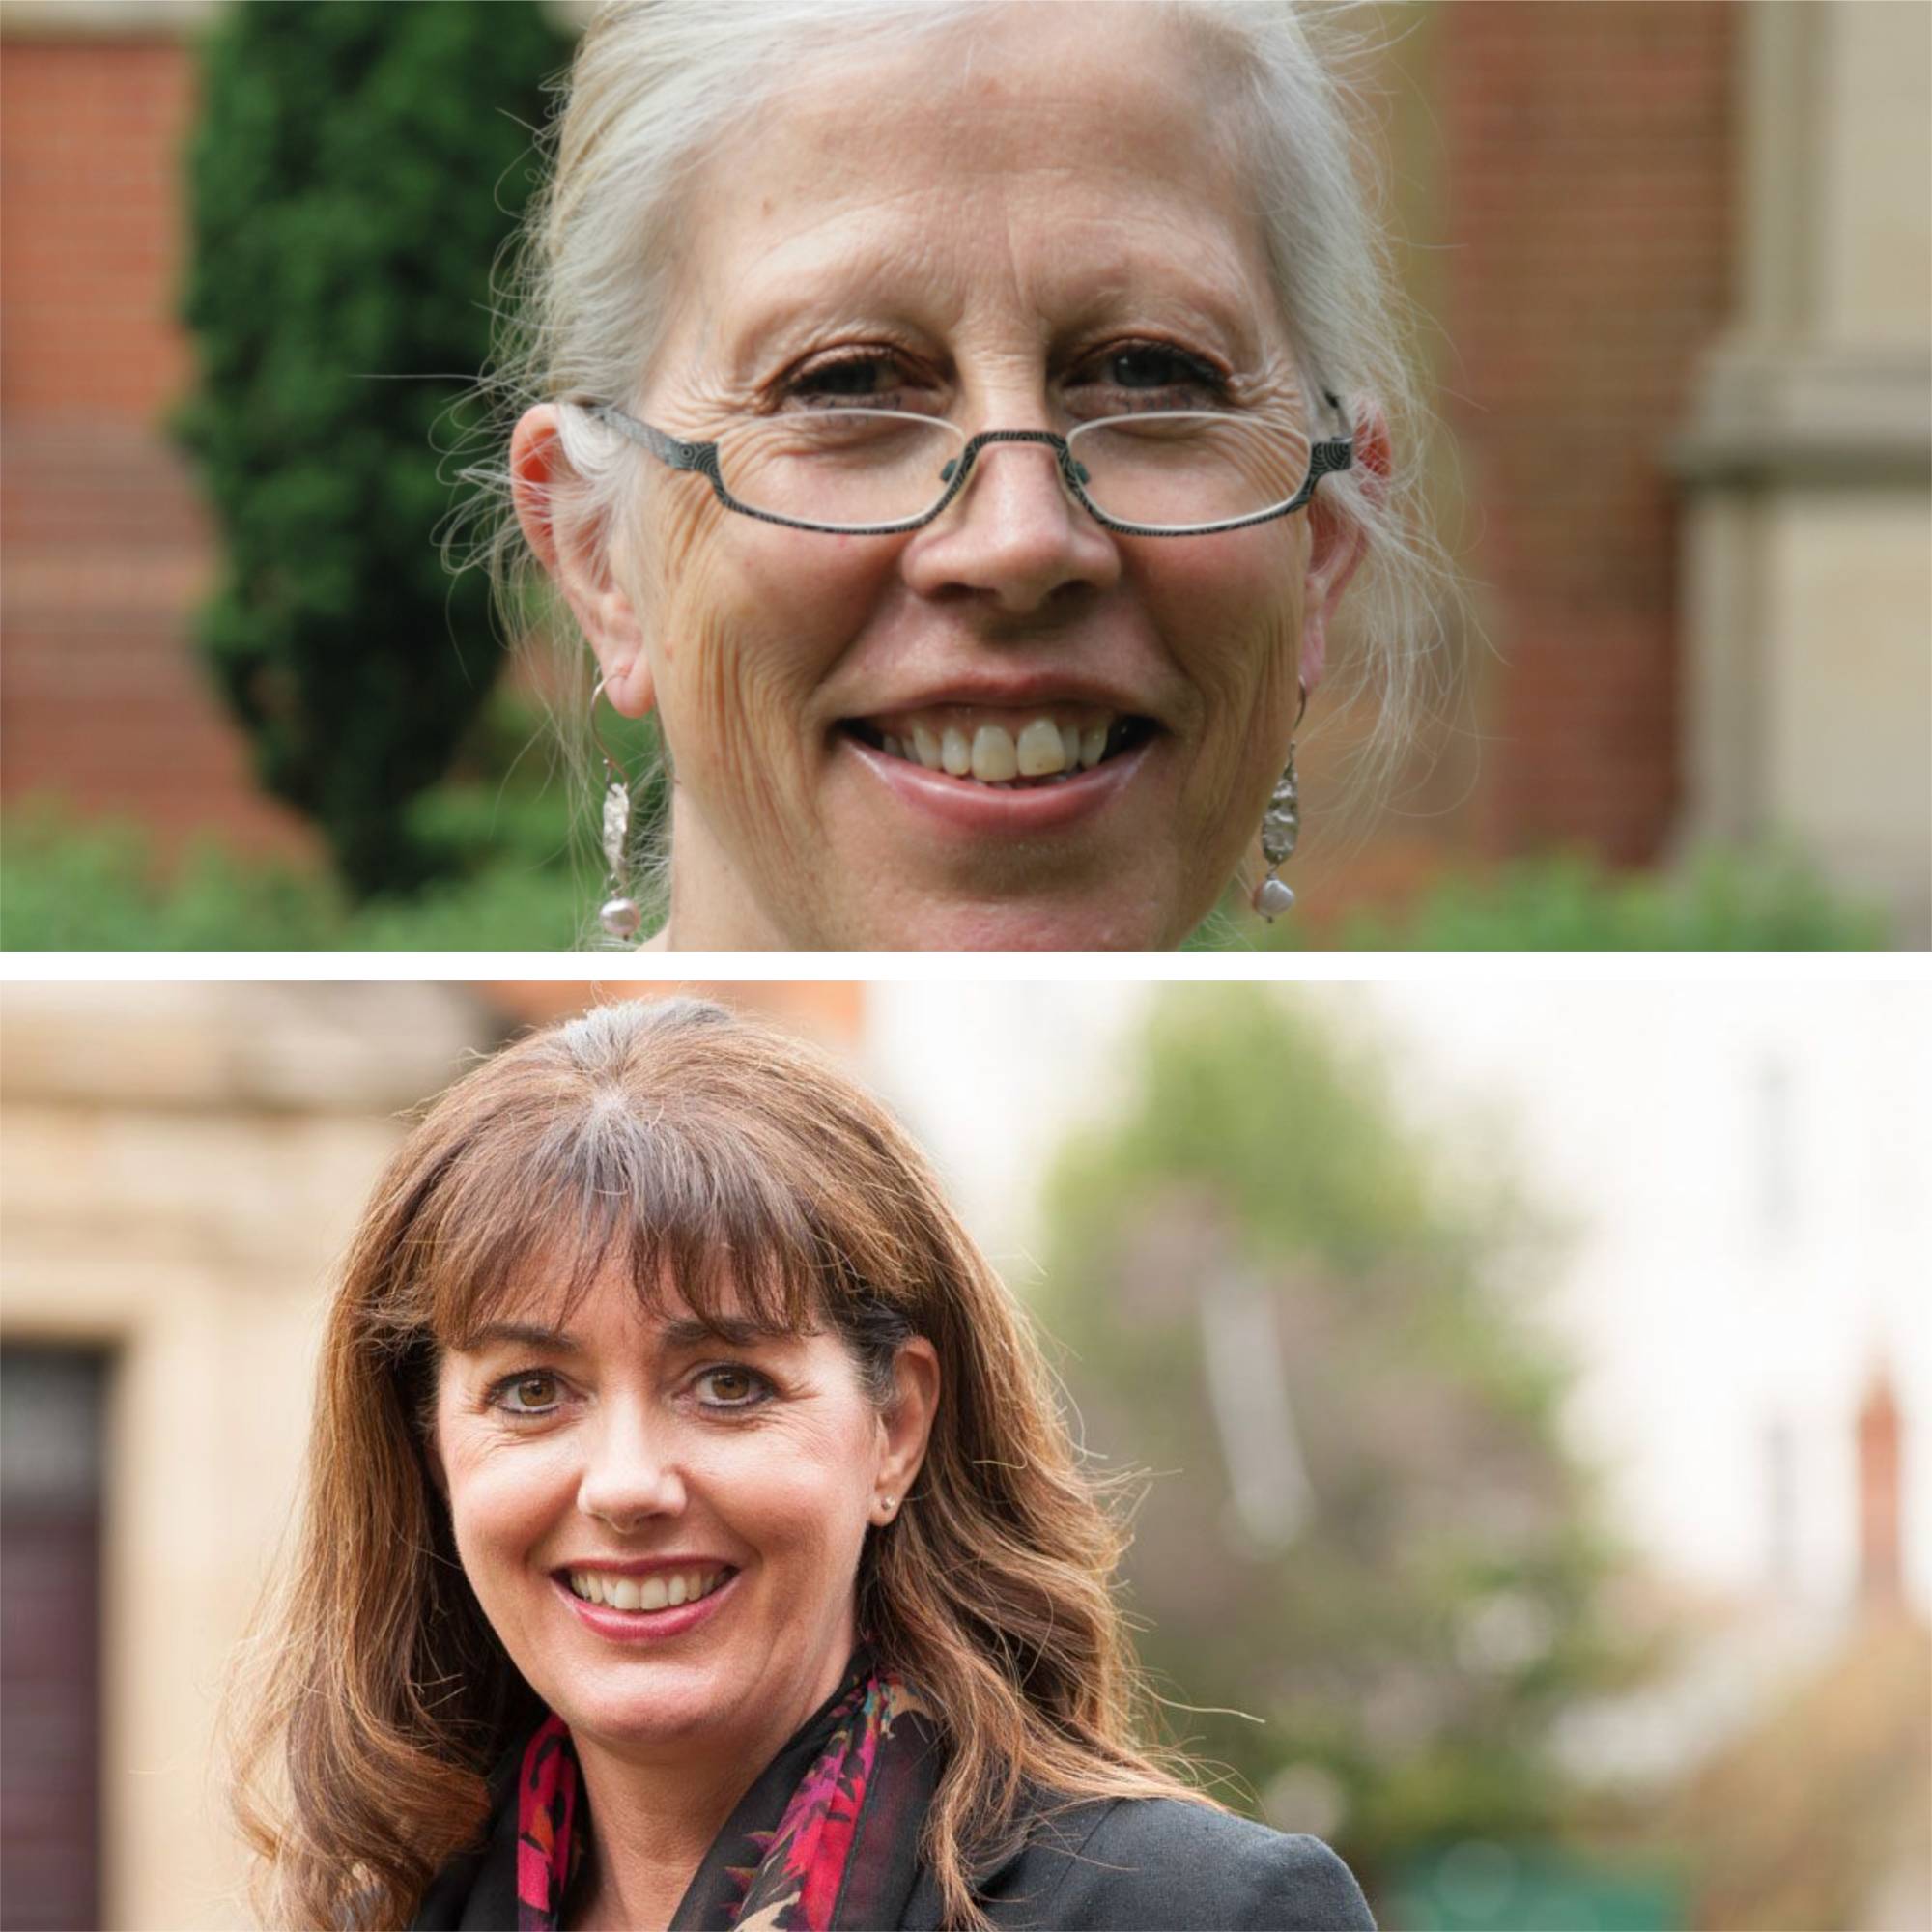 NEWS – Prof. Helen Bilton (Professor of Outdoor Learning) and Dr. Karen Jones (Associate Professor of Educational Leadership and Management) of the University of Reading’s Institute of Education securing funding from Research England’s Strategic Priorities Fund for Rapid Response Policy Engagement projects